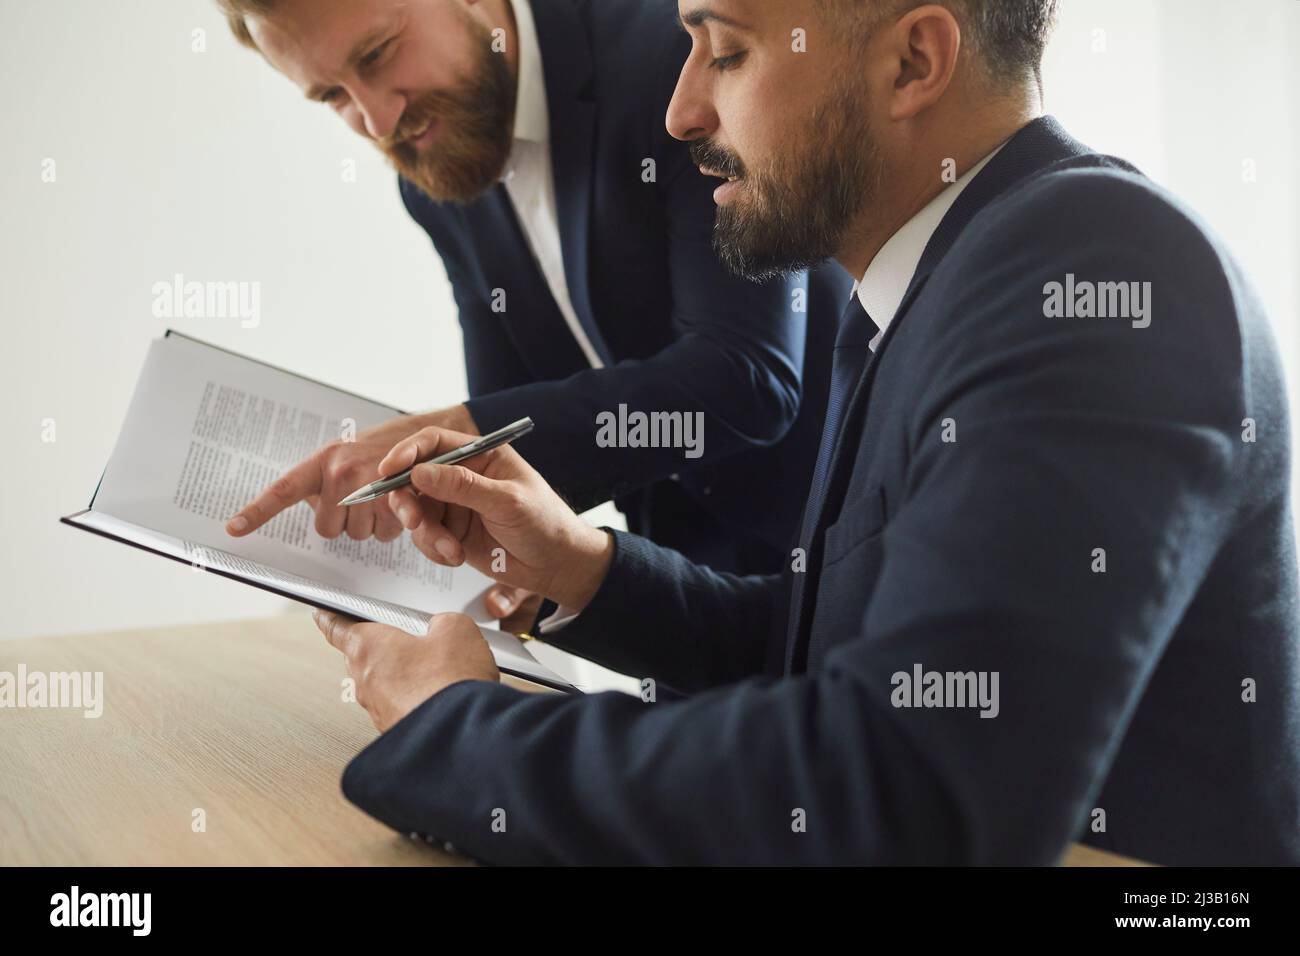 Serious colleagues of lawyers read legal documents together and study information on new legal case. Stock Photo